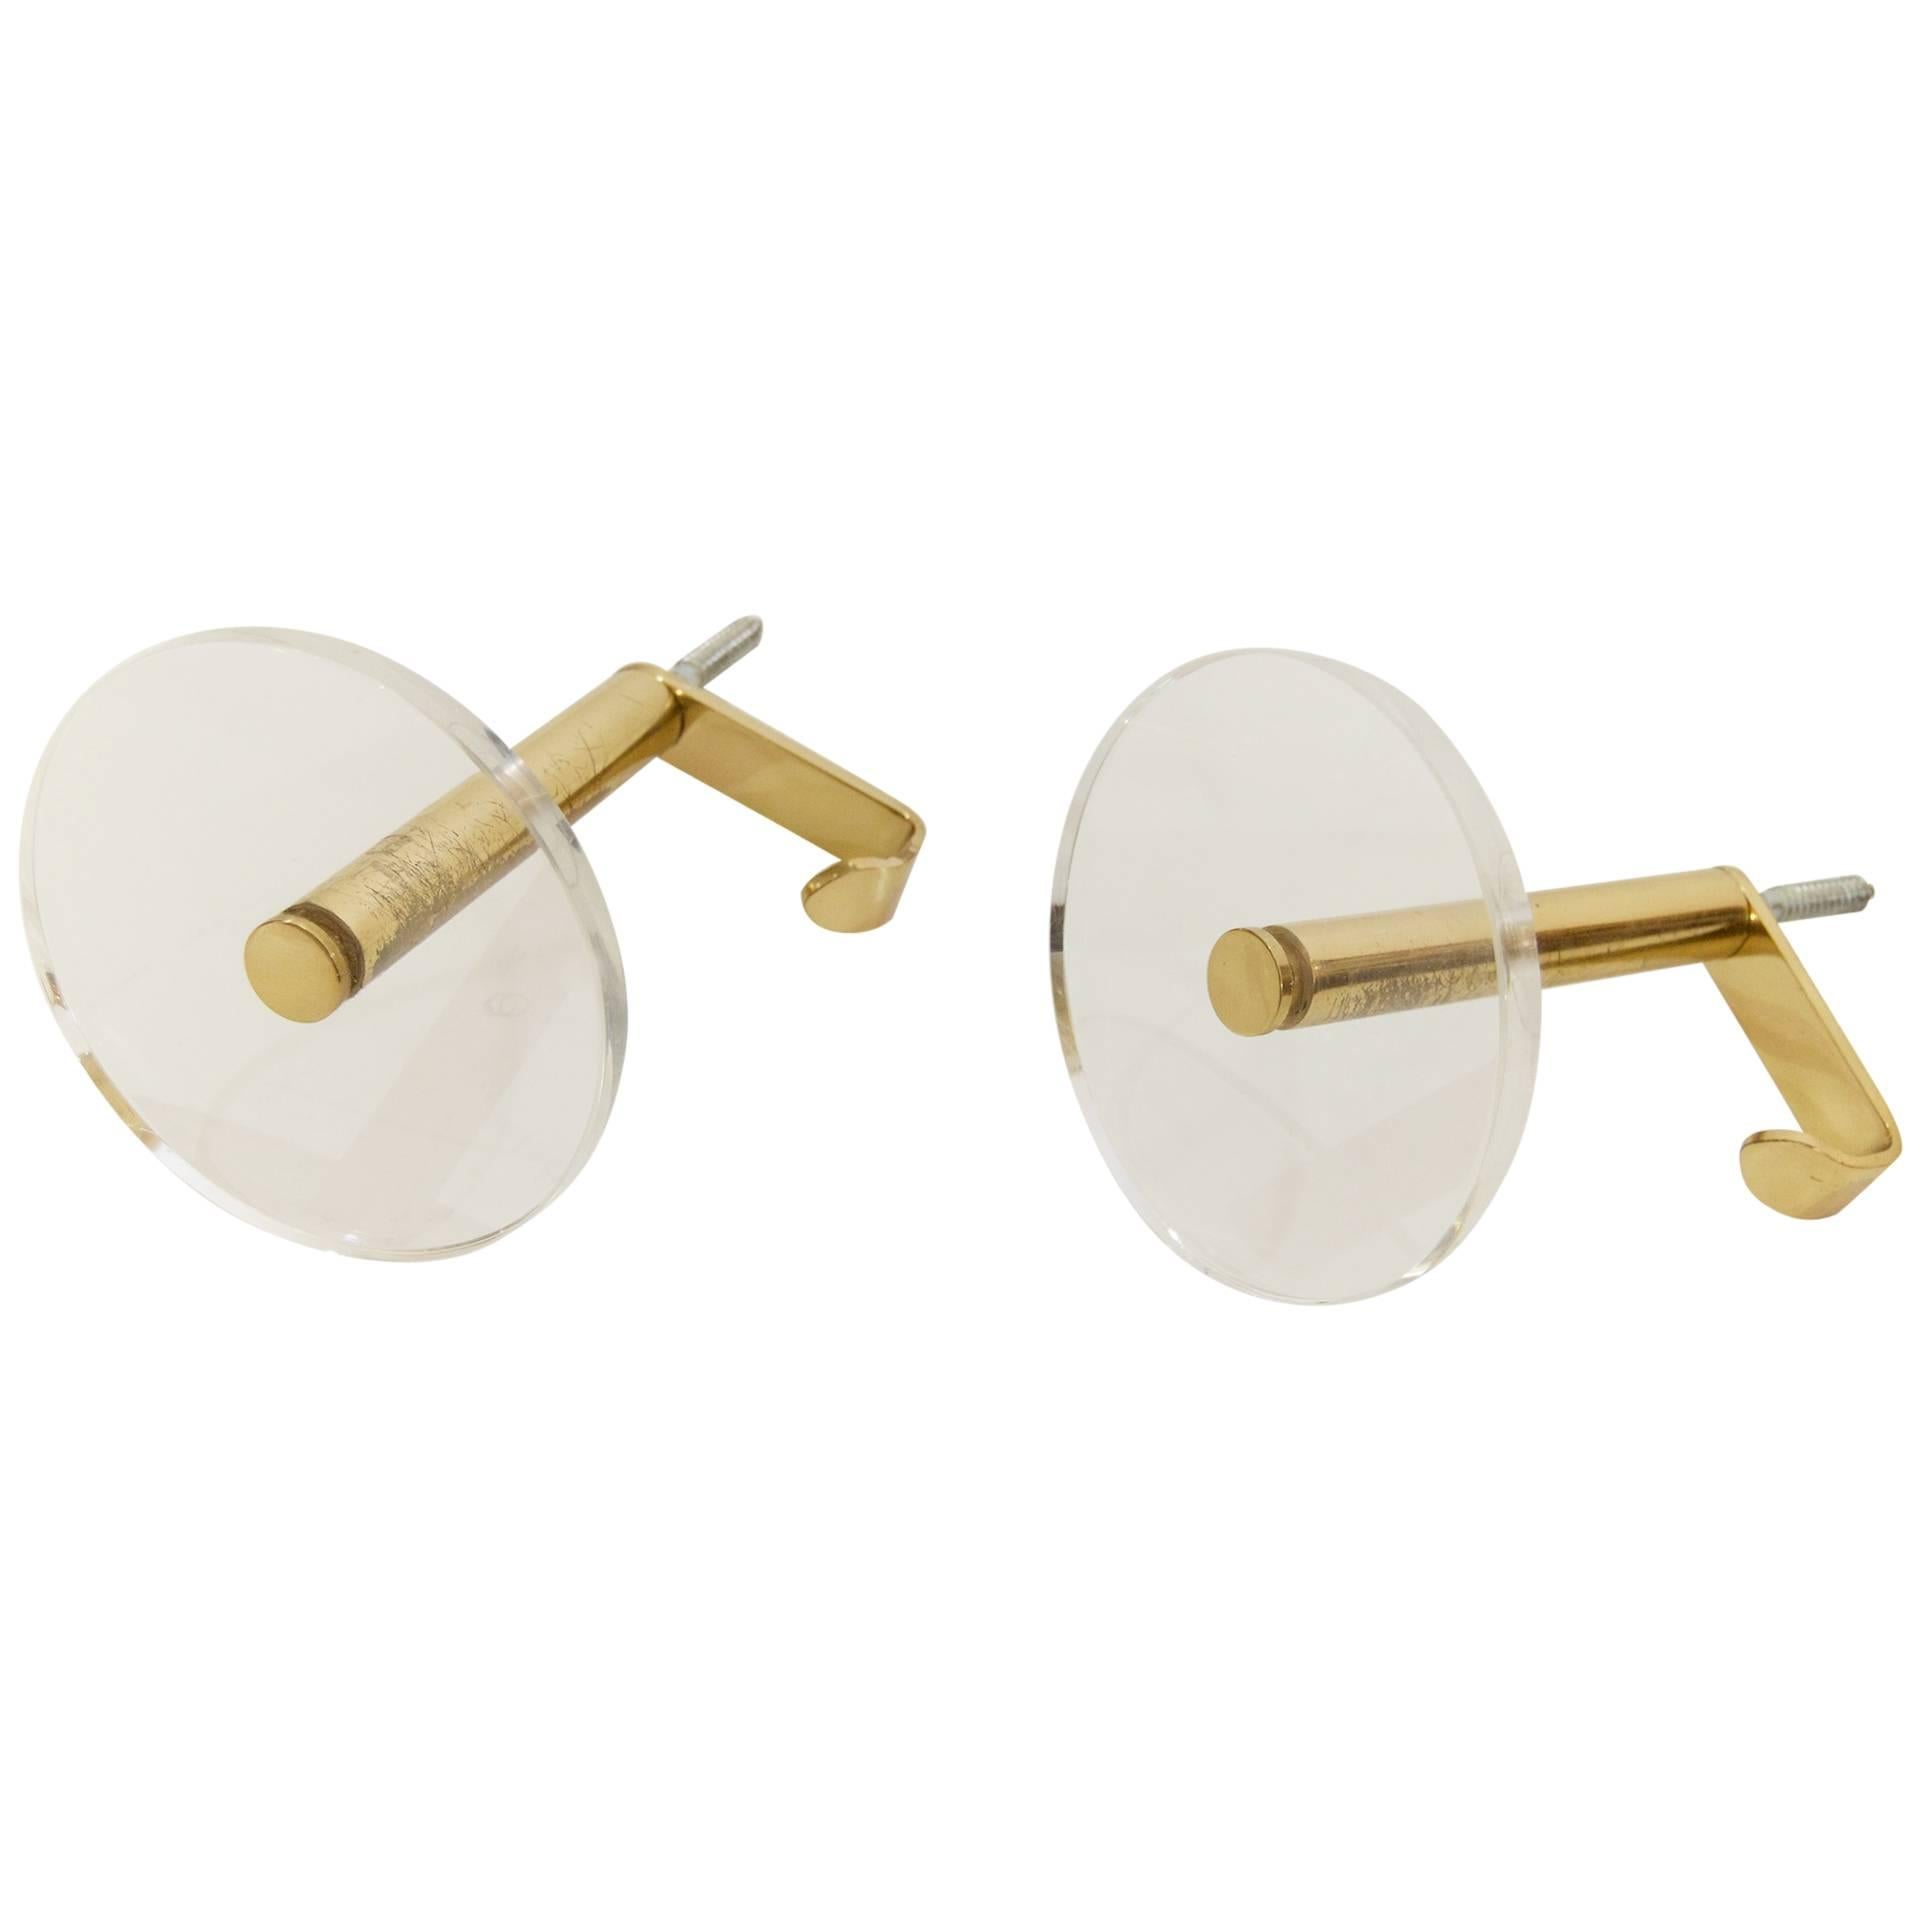 Pair of Brass and Lucite Coat Hooks